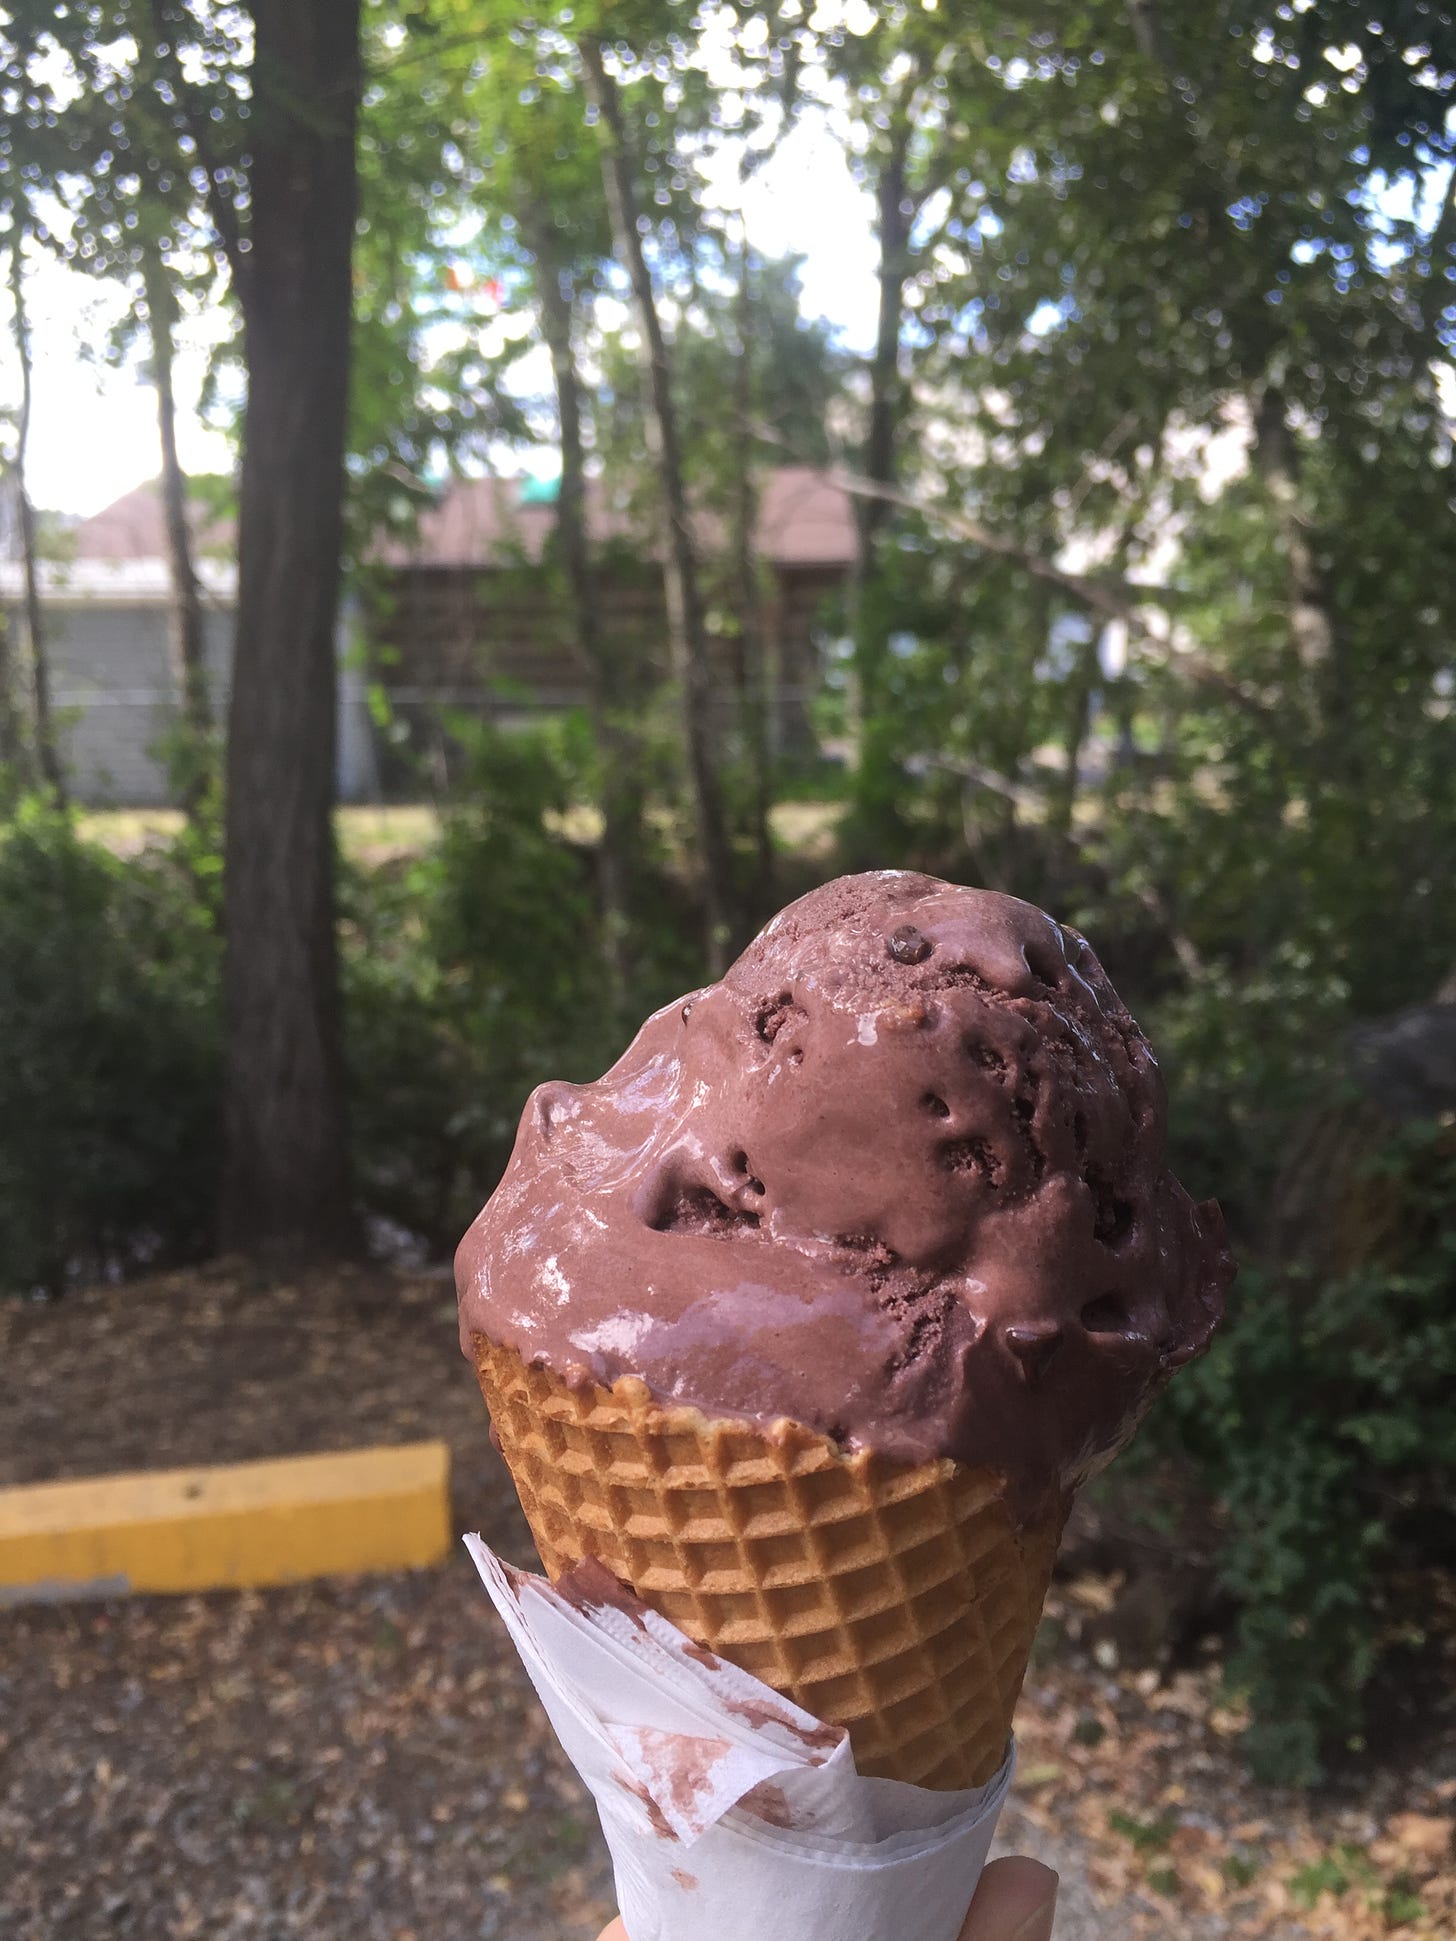 An scoop of ice cream in a waffle cone, chocolate with pieces of cherry and chocolate chips, held in front of a tree-lined creek.